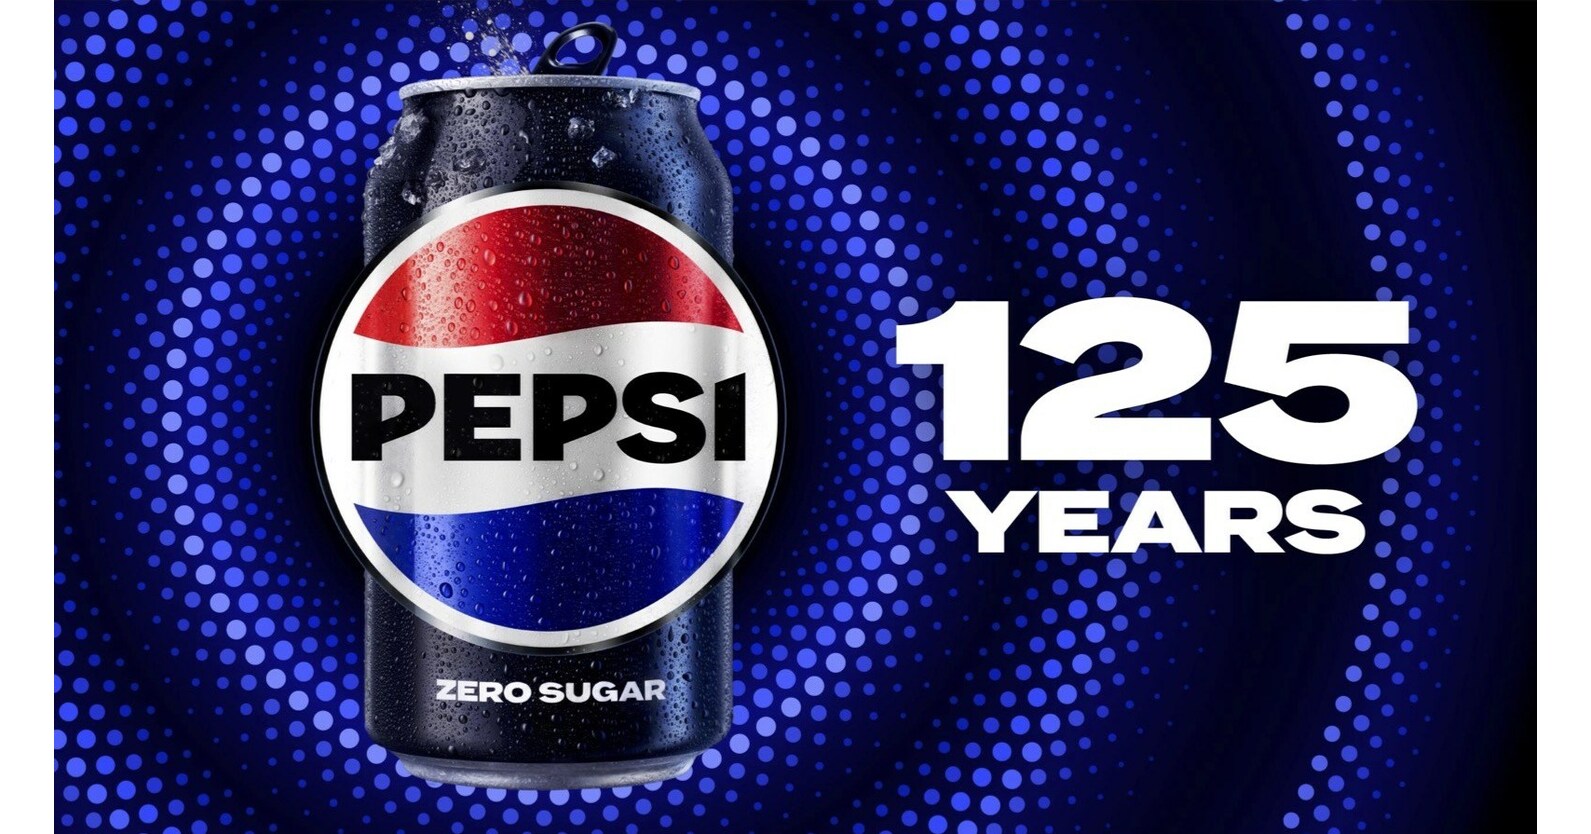 ITS CAMPAIGN, PRESENT ANNIVERSARY AND SPOTLIGHTING THE OF MOMENTS ICONIC PAST, PEPSI® WITH FUTURE HISTORIC 125TH CELEBRATES 125-DAY-LONG